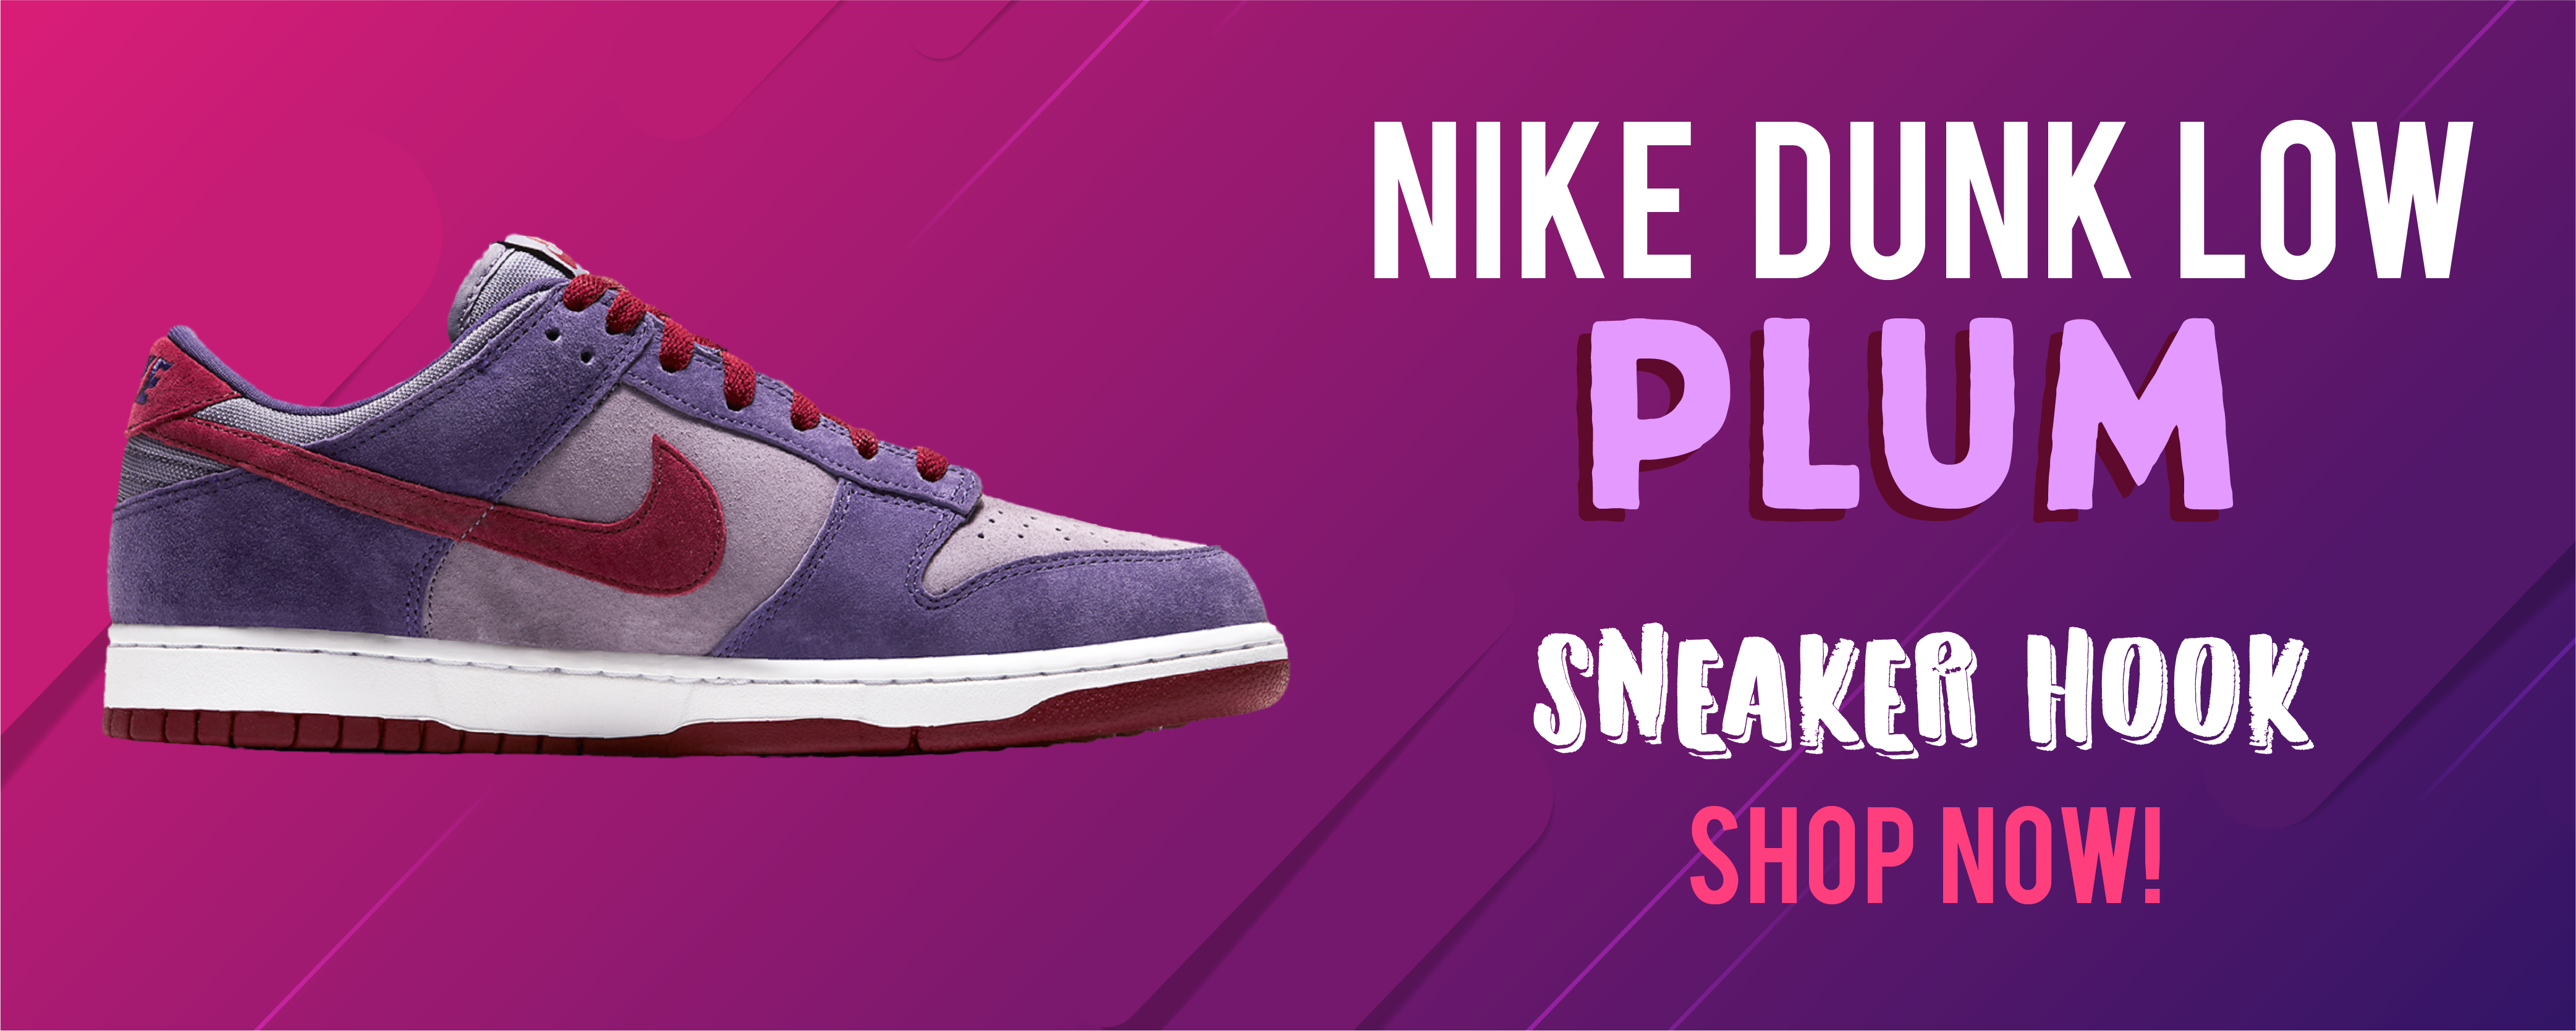 nike dunk plum outfit